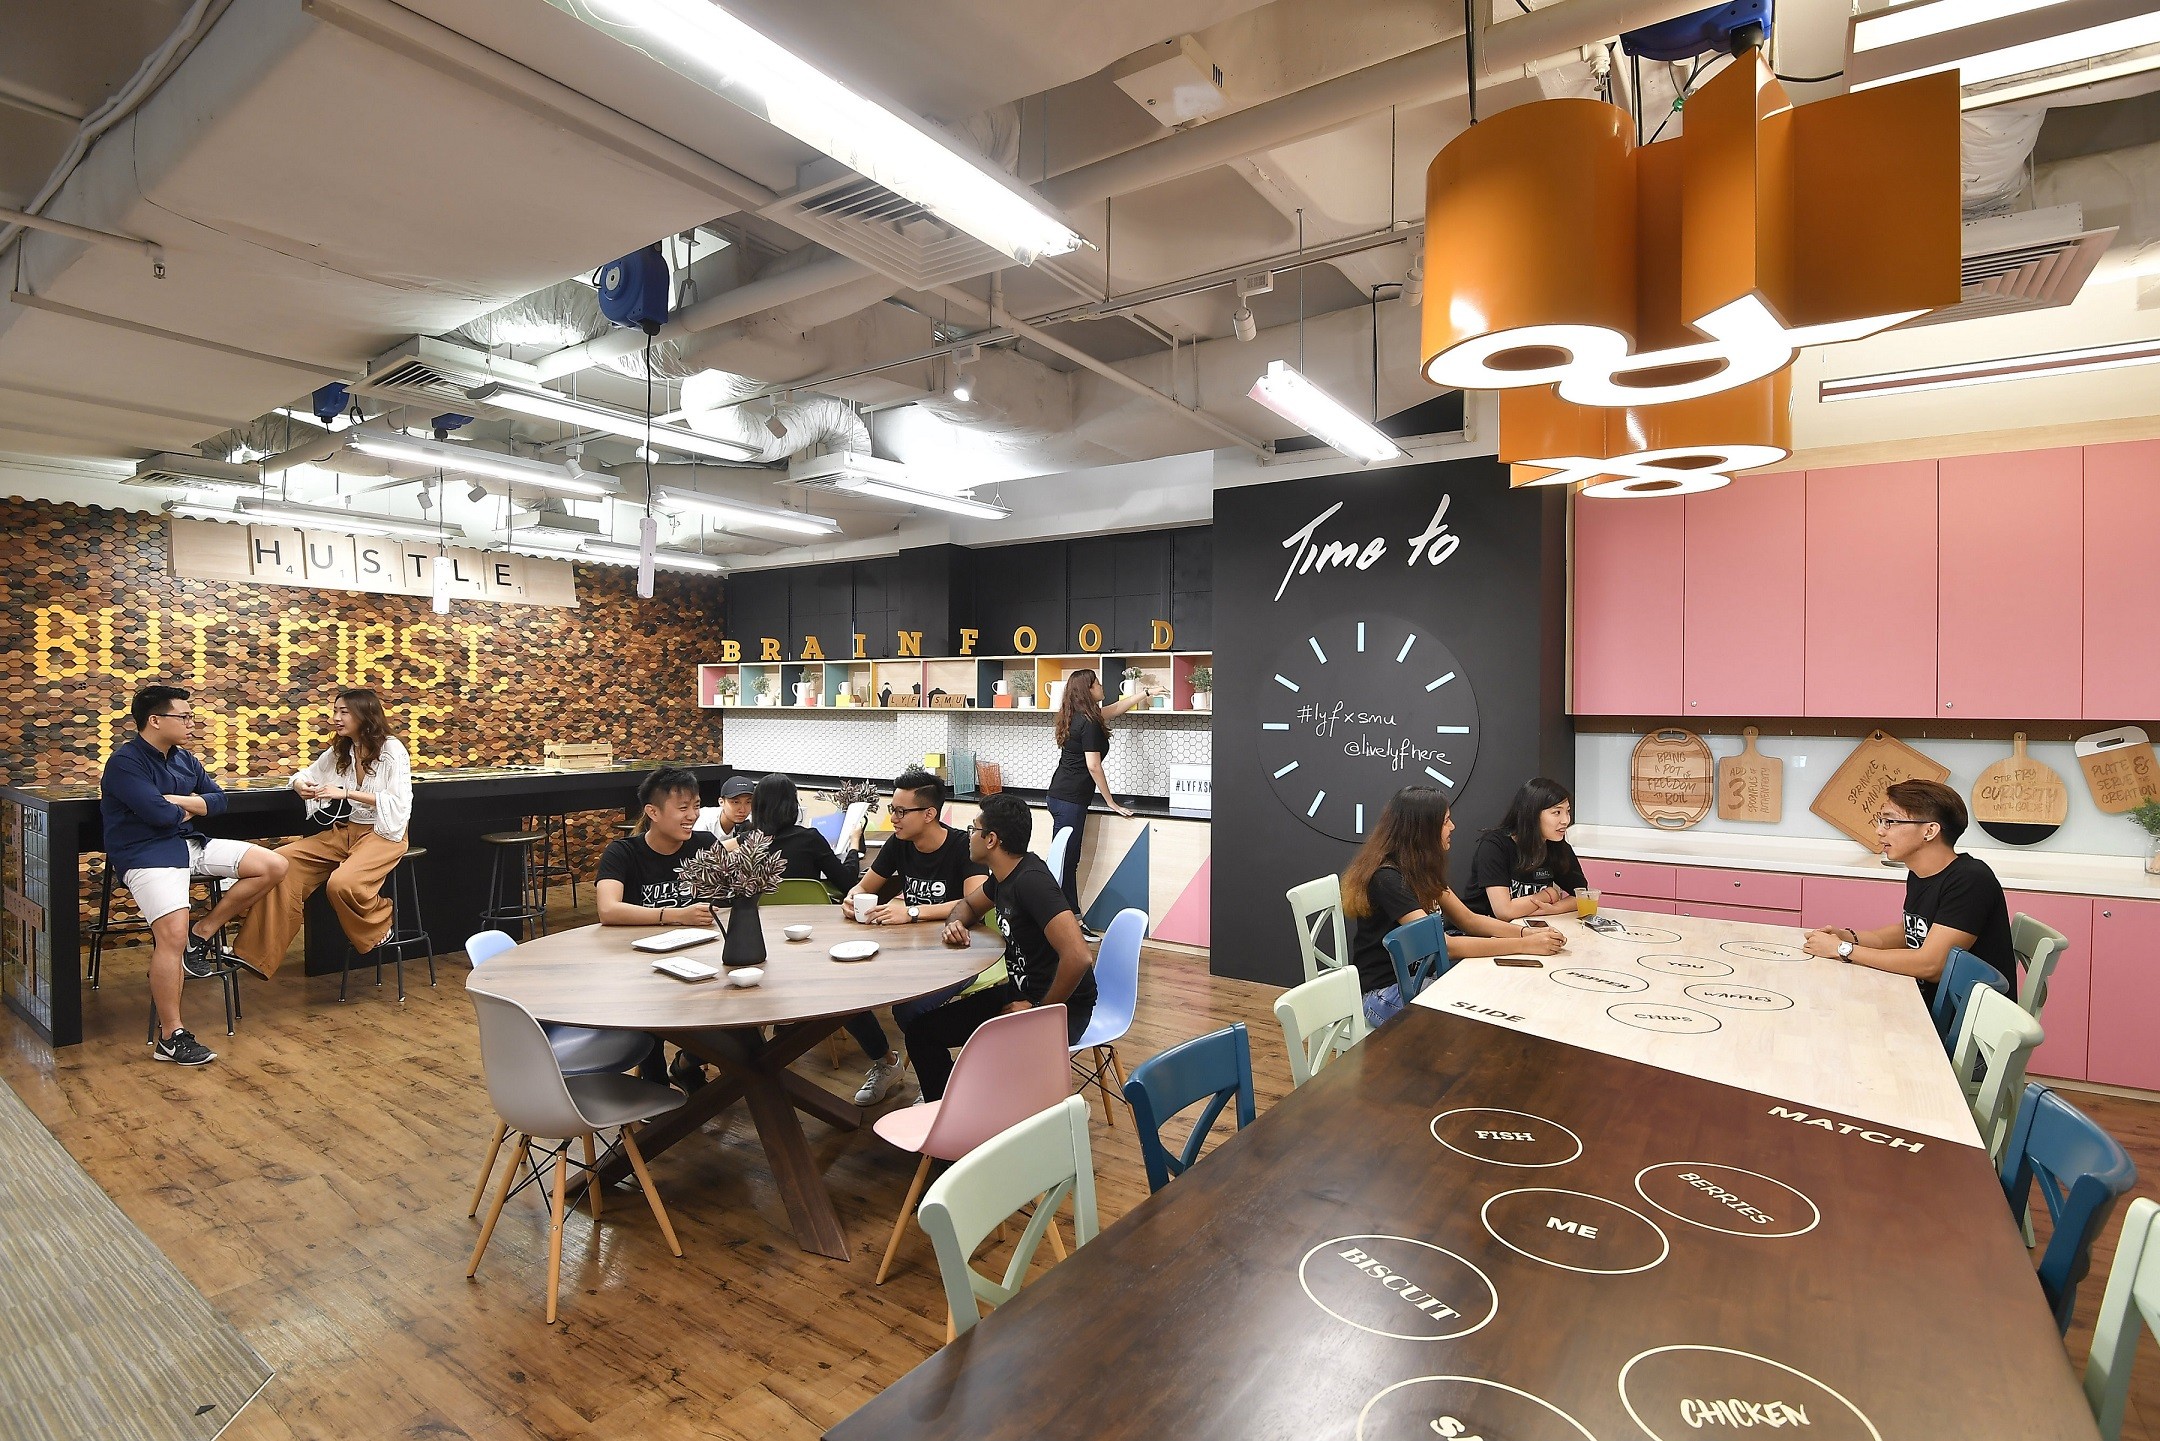 The lyf Social kitchen at lyf@SMU reveals the Ascott’s lyf brand collaboration on co-living concepts with Singapore Management University.